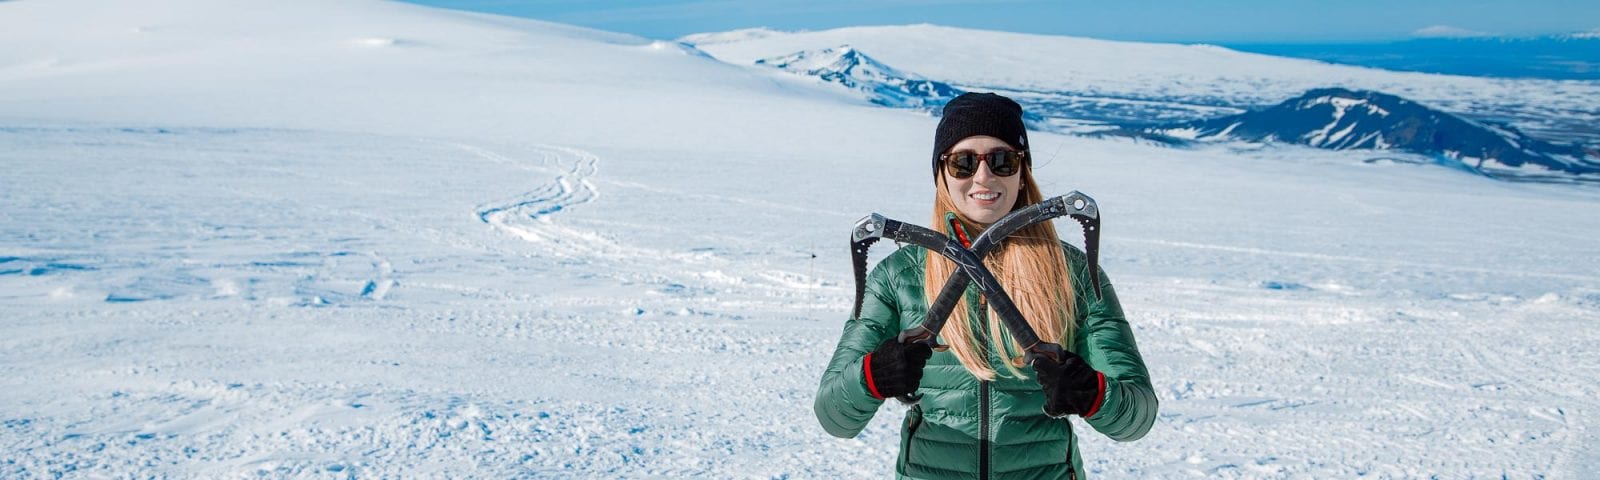 Girl holding ice axes on glacier in Iceland